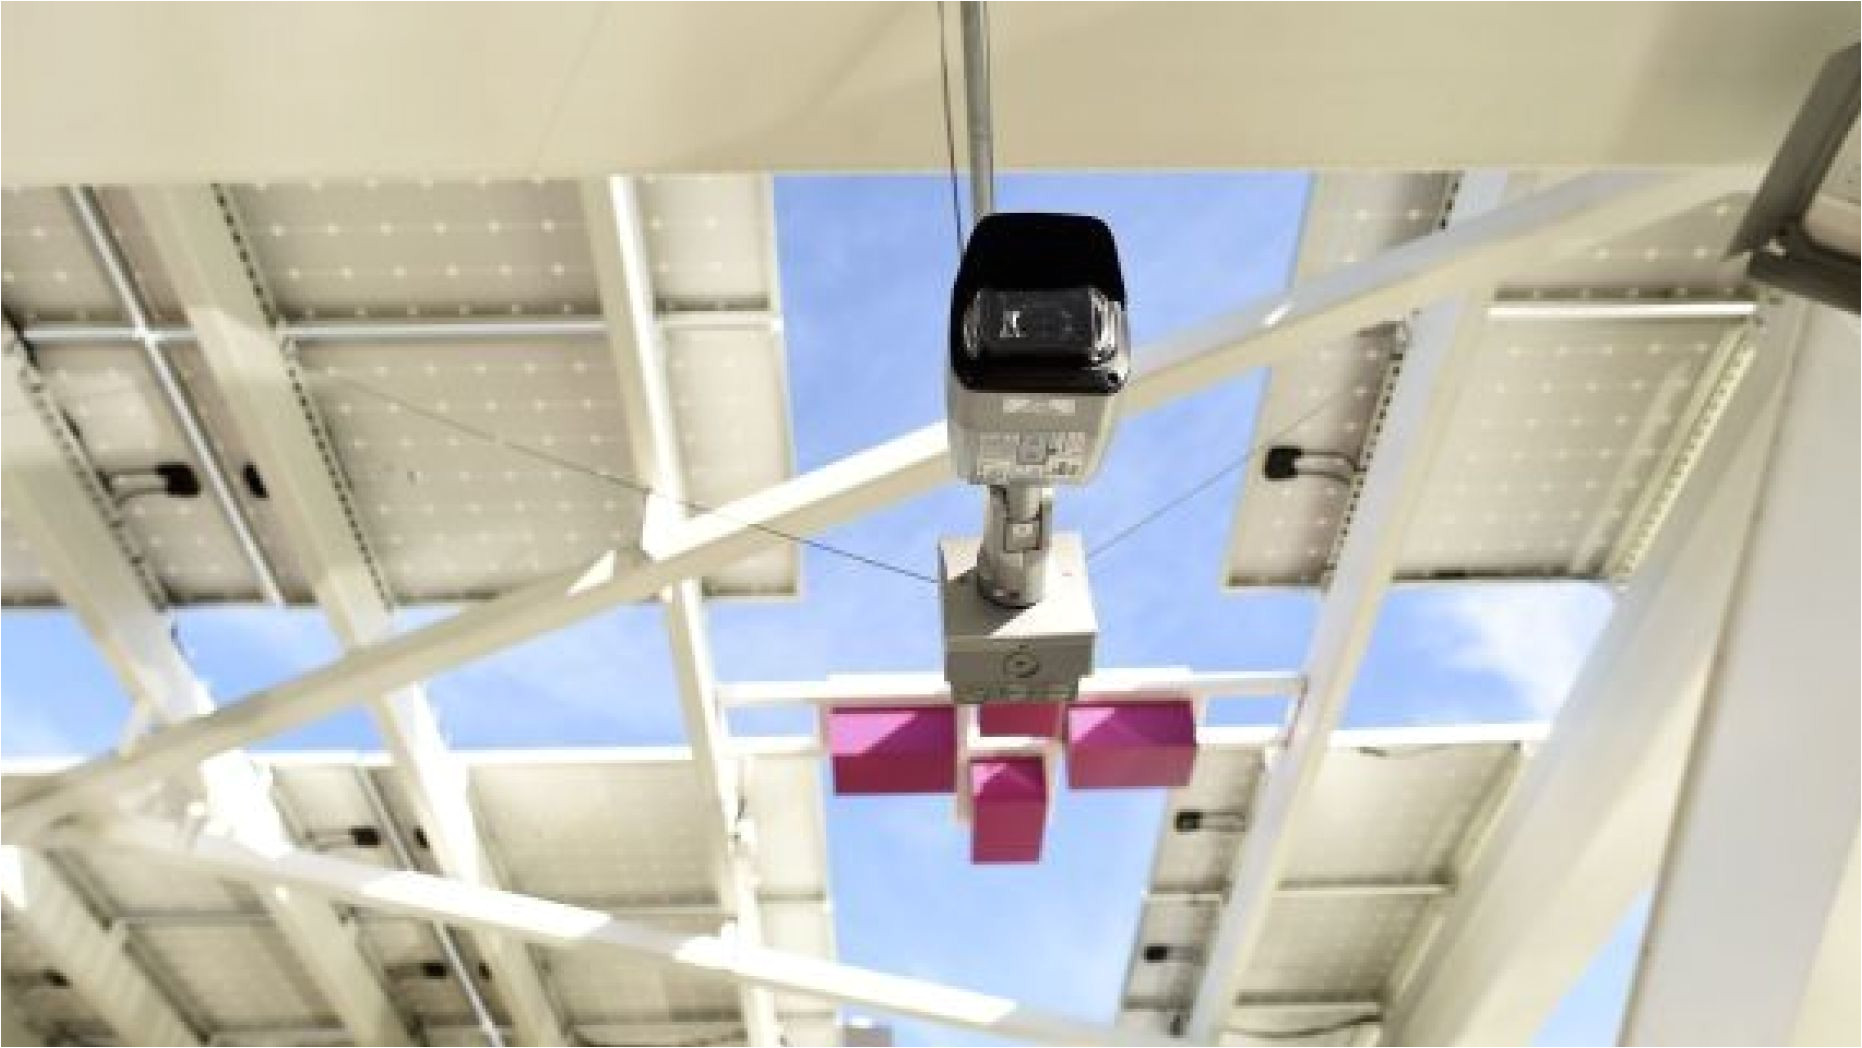 file photo a security camera hangs above a pedestrian bridge used as an entrance to